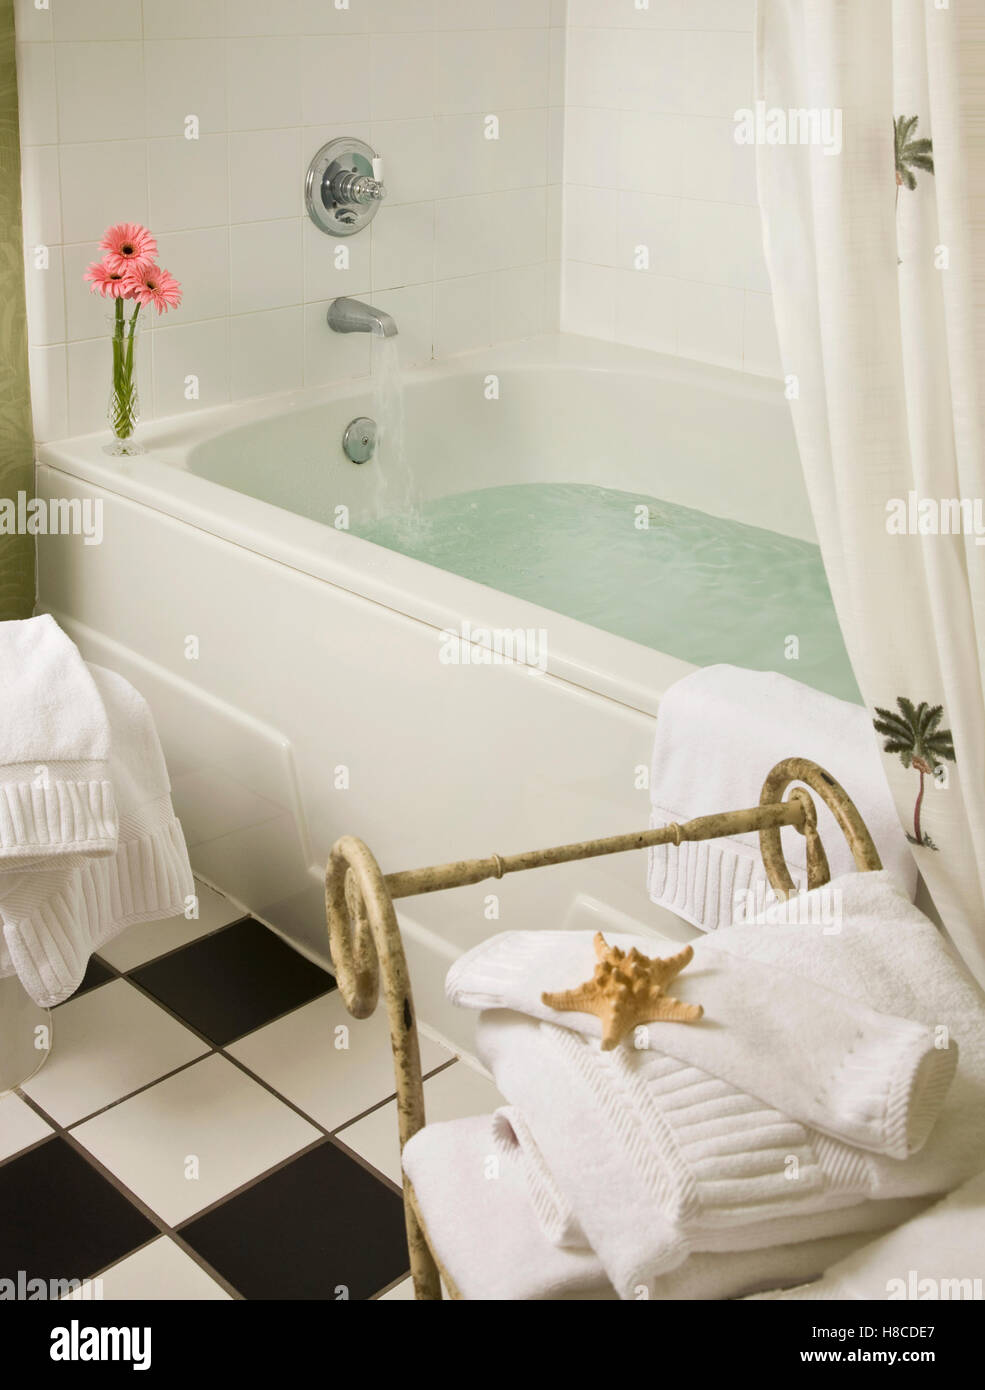 Water running from tap fitting into bathtub. Stock Photo